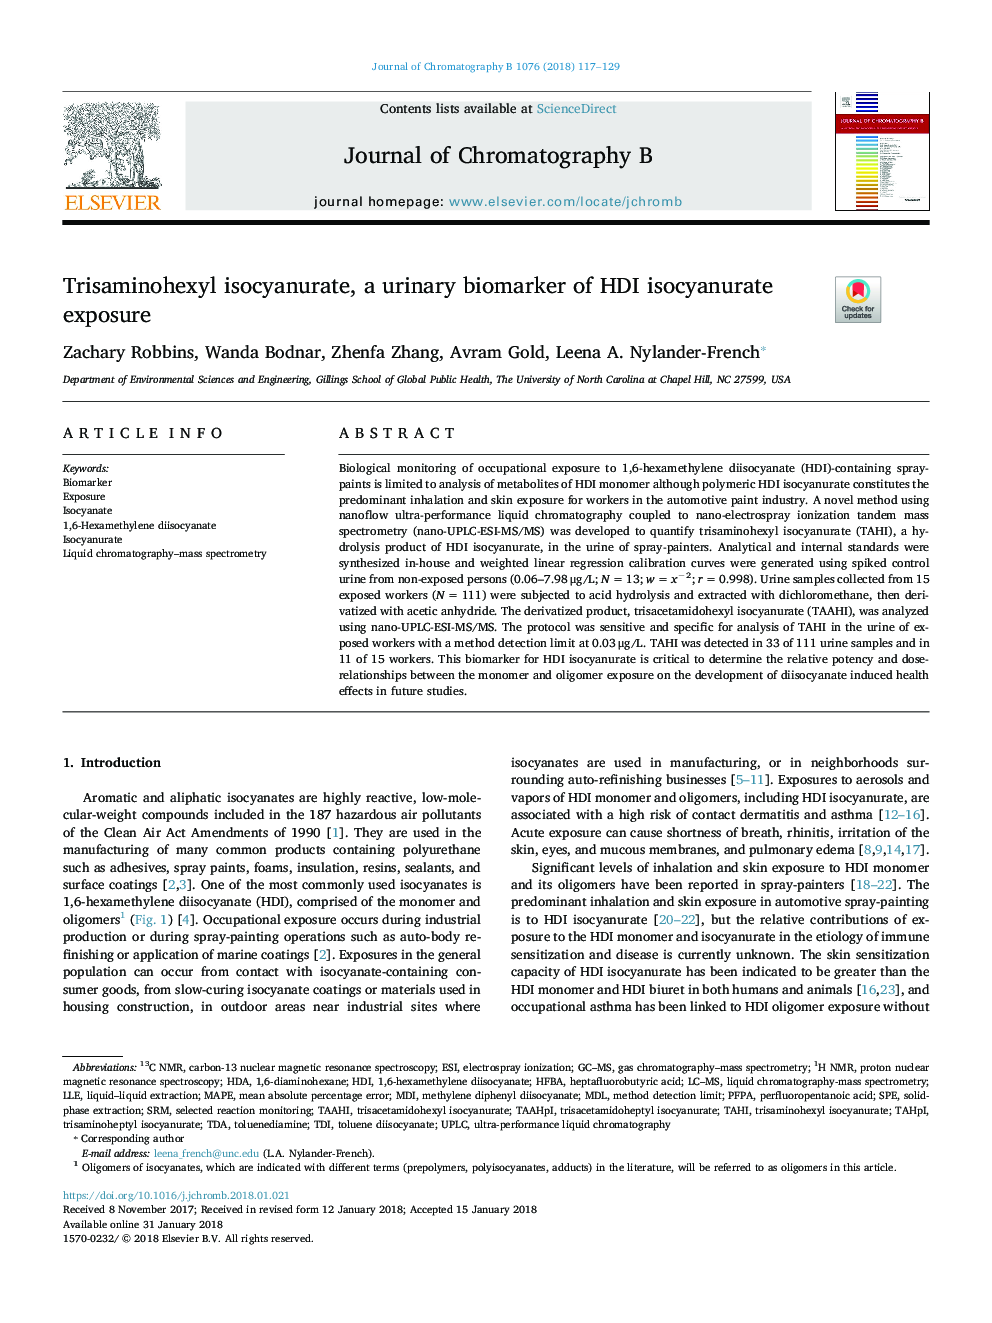 Trisaminohexyl isocyanurate, a urinary biomarker of HDI isocyanurate exposure